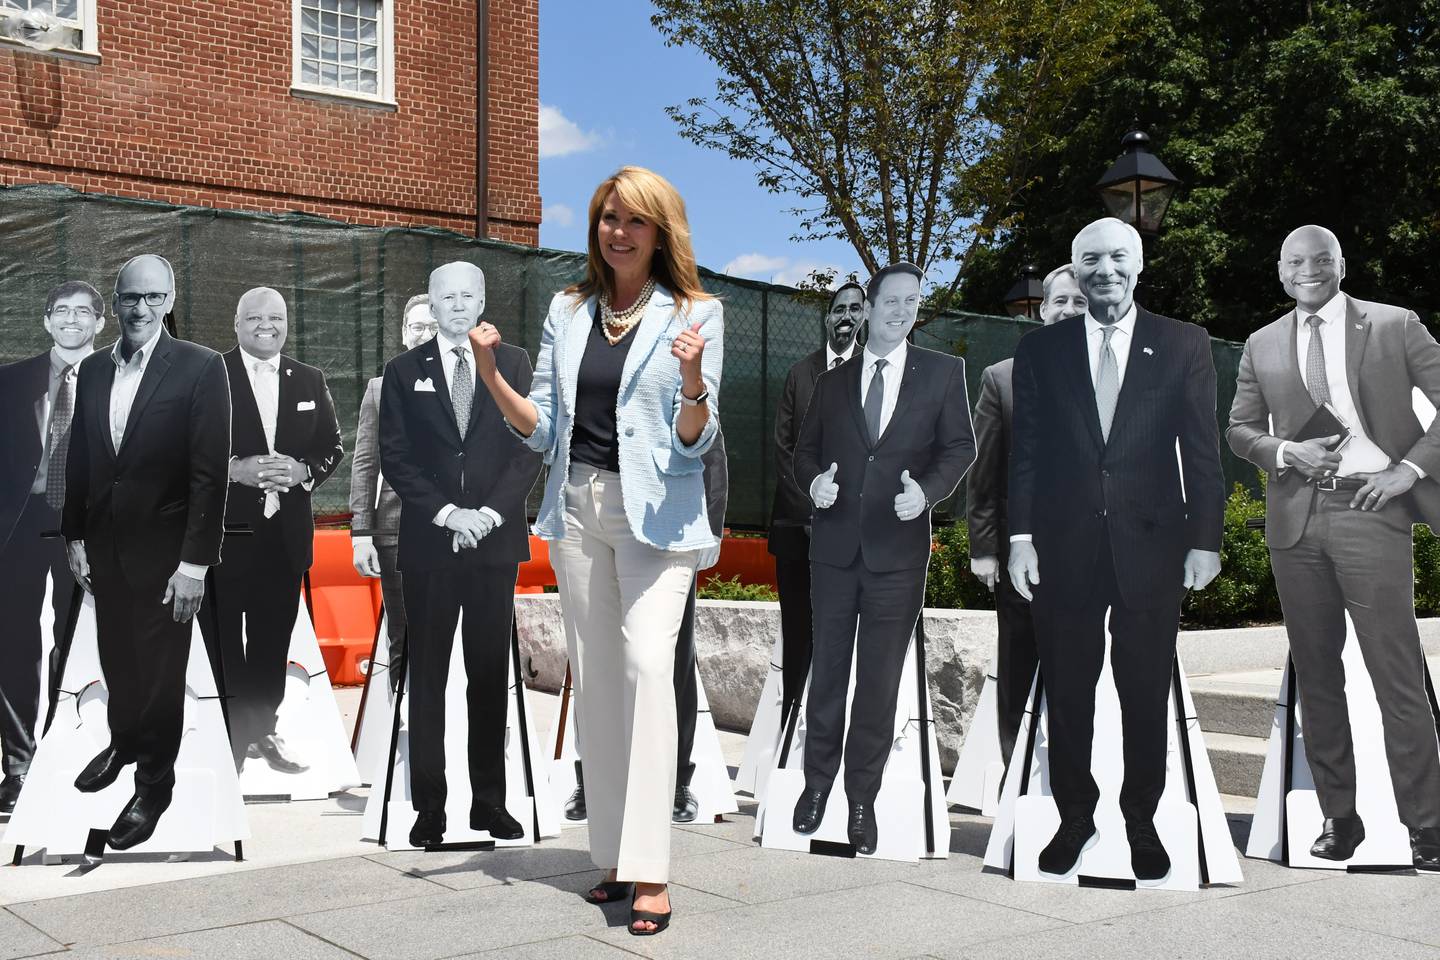 Maryland Republican candidate for governor Kelly Schulz poses for pictures in front of cardboard cutouts of most of the Democratic candidates -- plus Republican candidate Dan Cox and President Joe Biden for good measure -- on Lawyers Mall in Annapolis. Schulz held a news conference to propose tax breaks for Marylanders.